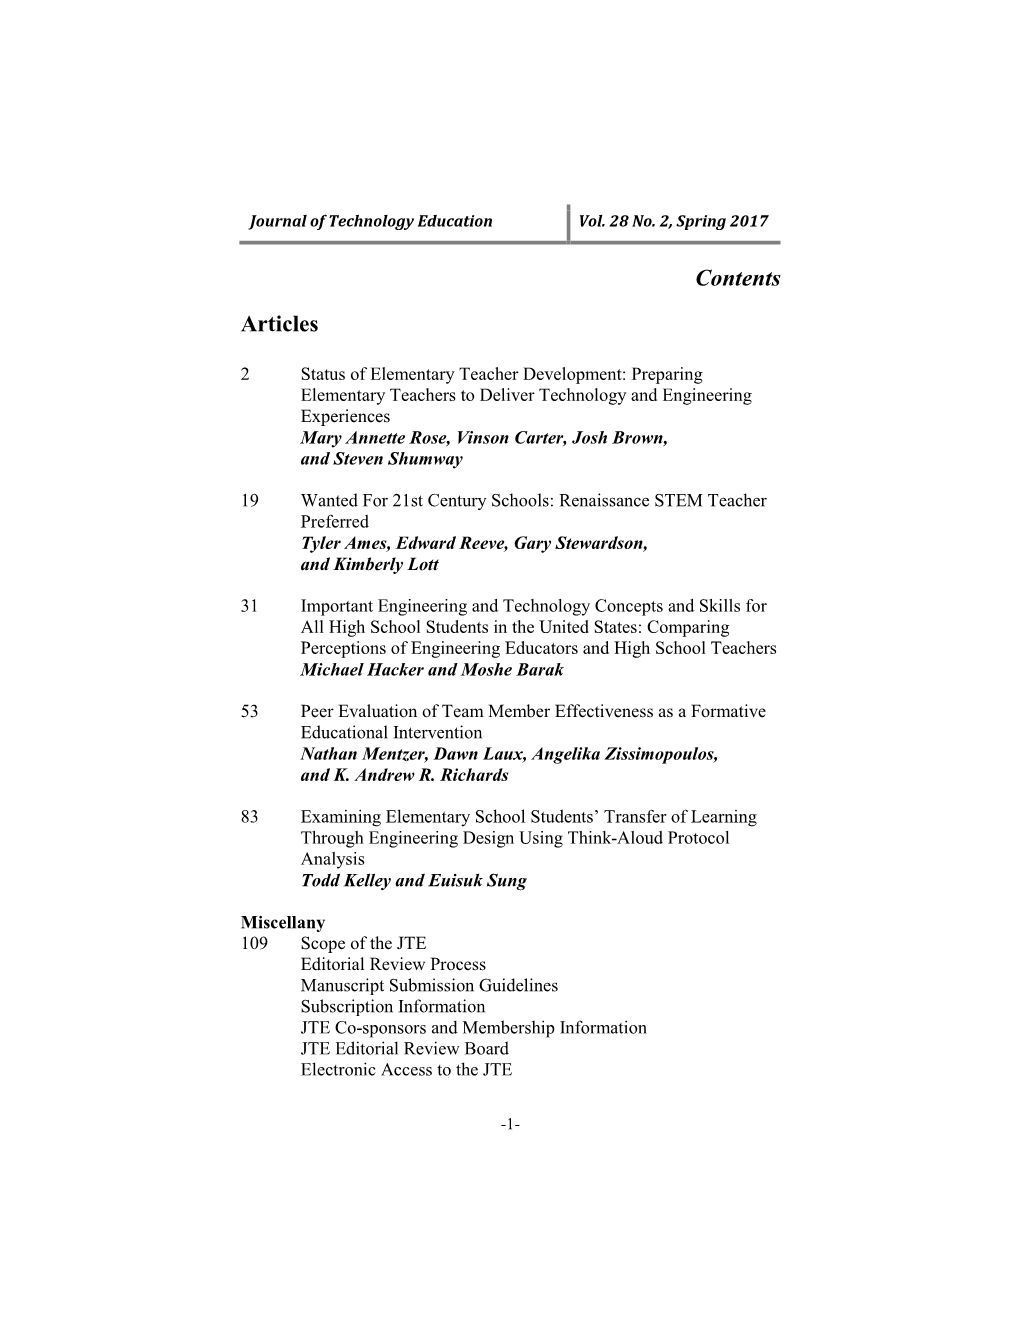 Journal of Technology Education Vol